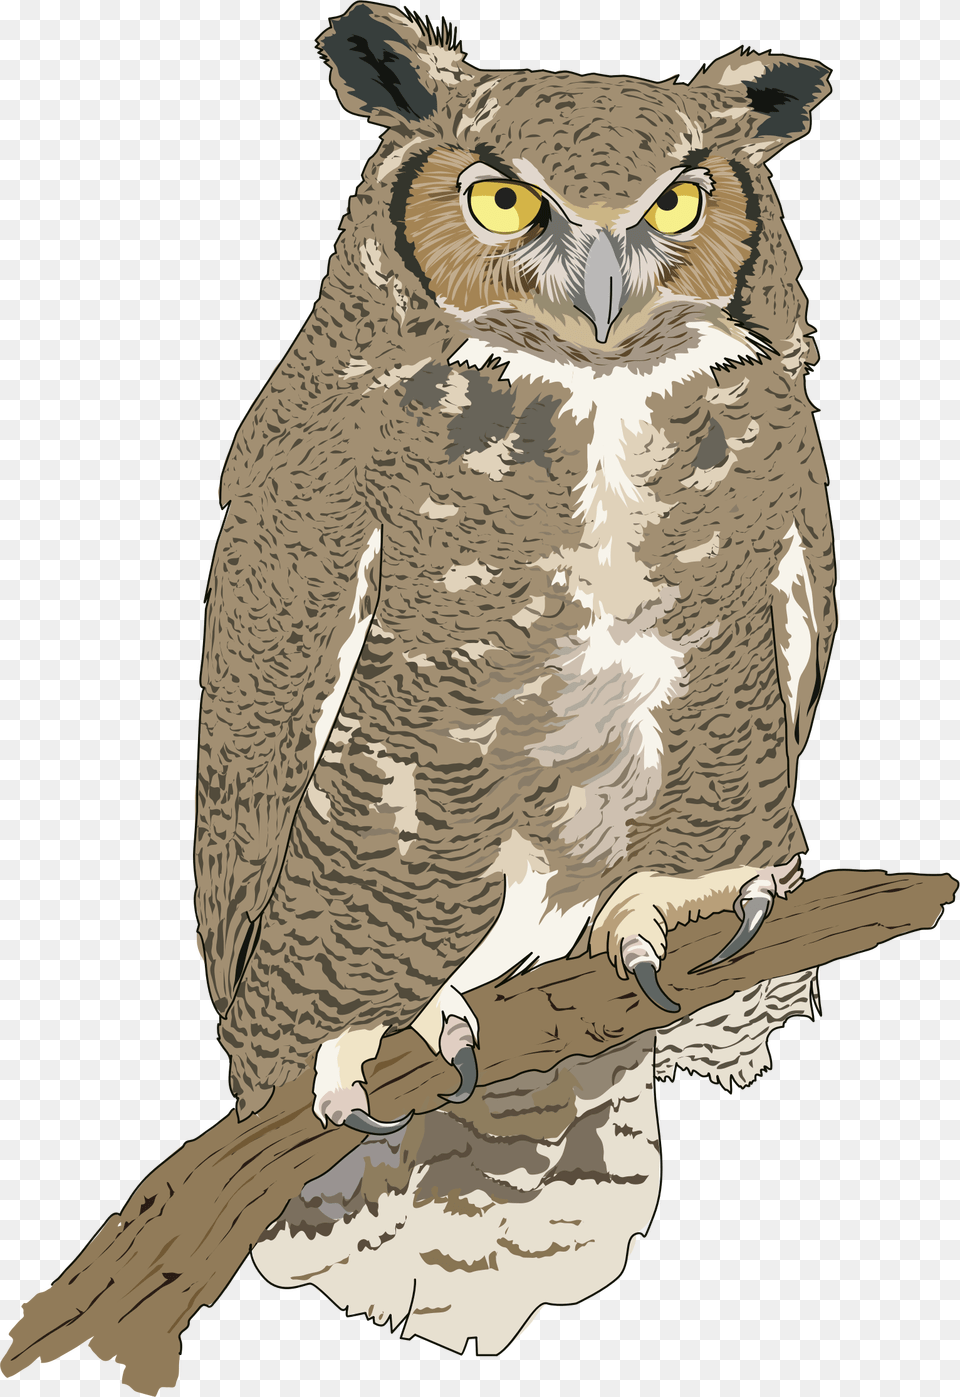 Realistic Birds Cliparts 12 546 X 800 Webcomicmsnet Food Chain Examples And Explanation, Animal, Bird, Owl Free Transparent Png